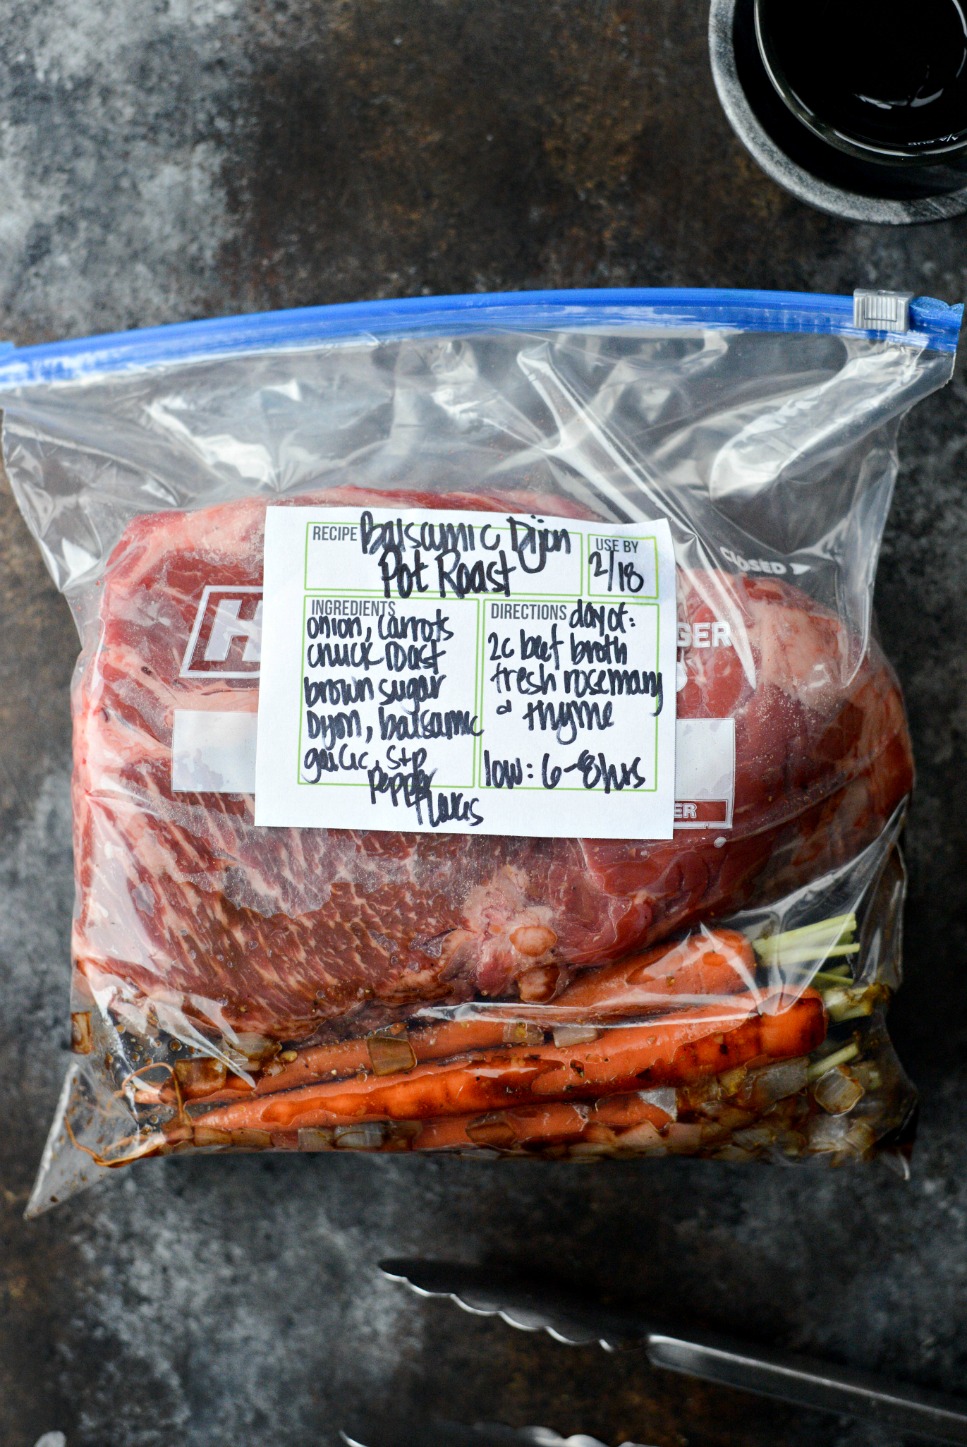 meal prepped ingredients in bag with label